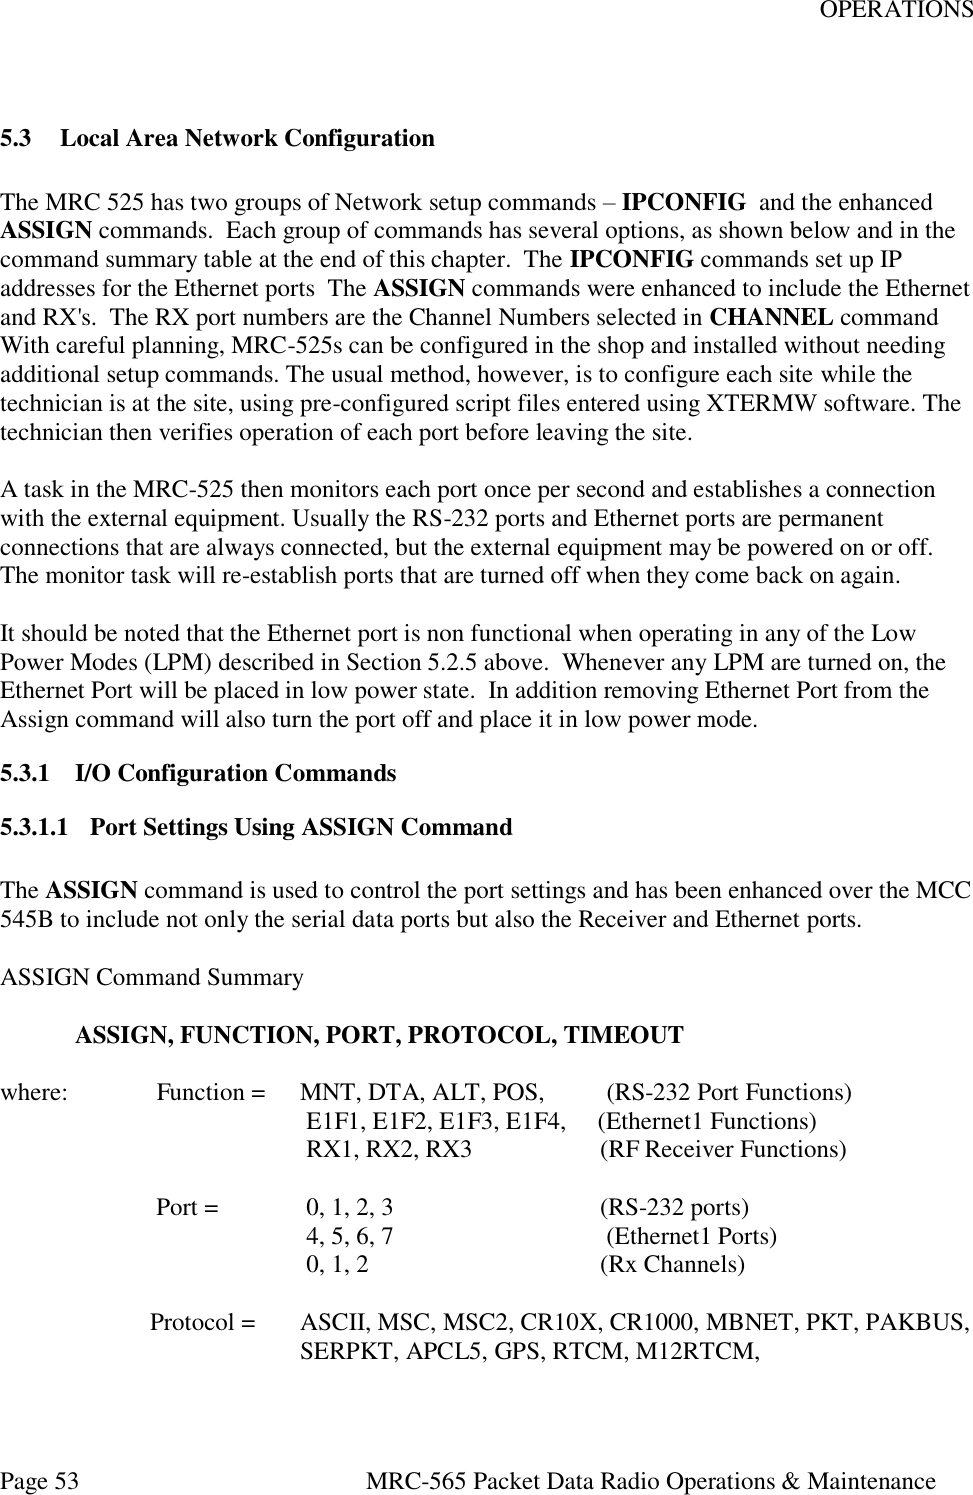 OPERATIONS Page 53  MRC-565 Packet Data Radio Operations &amp; Maintenance  5.3 Local Area Network Configuration  The MRC 525 has two groups of Network setup commands – IPCONFIG  and the enhanced ASSIGN commands.  Each group of commands has several options, as shown below and in the command summary table at the end of this chapter.  The IPCONFIG commands set up IP addresses for the Ethernet ports  The ASSIGN commands were enhanced to include the Ethernet and RX&apos;s.  The RX port numbers are the Channel Numbers selected in CHANNEL command With careful planning, MRC-525s can be configured in the shop and installed without needing additional setup commands. The usual method, however, is to configure each site while the technician is at the site, using pre-configured script files entered using XTERMW software. The technician then verifies operation of each port before leaving the site.  A task in the MRC-525 then monitors each port once per second and establishes a connection with the external equipment. Usually the RS-232 ports and Ethernet ports are permanent connections that are always connected, but the external equipment may be powered on or off. The monitor task will re-establish ports that are turned off when they come back on again.  It should be noted that the Ethernet port is non functional when operating in any of the Low Power Modes (LPM) described in Section 5.2.5 above.  Whenever any LPM are turned on, the Ethernet Port will be placed in low power state.  In addition removing Ethernet Port from the Assign command will also turn the port off and place it in low power mode.    5.3.1 I/O Configuration Commands 5.3.1.1 Port Settings Using ASSIGN Command  The ASSIGN command is used to control the port settings and has been enhanced over the MCC 545B to include not only the serial data ports but also the Receiver and Ethernet ports.   ASSIGN Command Summary    ASSIGN, FUNCTION, PORT, PROTOCOL, TIMEOUT  where:    Function =   MNT, DTA, ALT, POS,          (RS-232 Port Functions)                                       E1F1, E1F2, E1F3, E1F4,     (Ethernet1 Functions)                                       RX1, RX2, RX3              (RF Receiver Functions)                      Port =      0, 1, 2, 3                                 (RS-232 ports)                                       4, 5, 6, 7                                  (Ethernet1 Ports)          0, 1, 2                 (Rx Channels)                     Protocol =   ASCII, MSC, MSC2, CR10X, CR1000, MBNET, PKT, PAKBUS,         SERPKT, APCL5, GPS, RTCM, M12RTCM,      